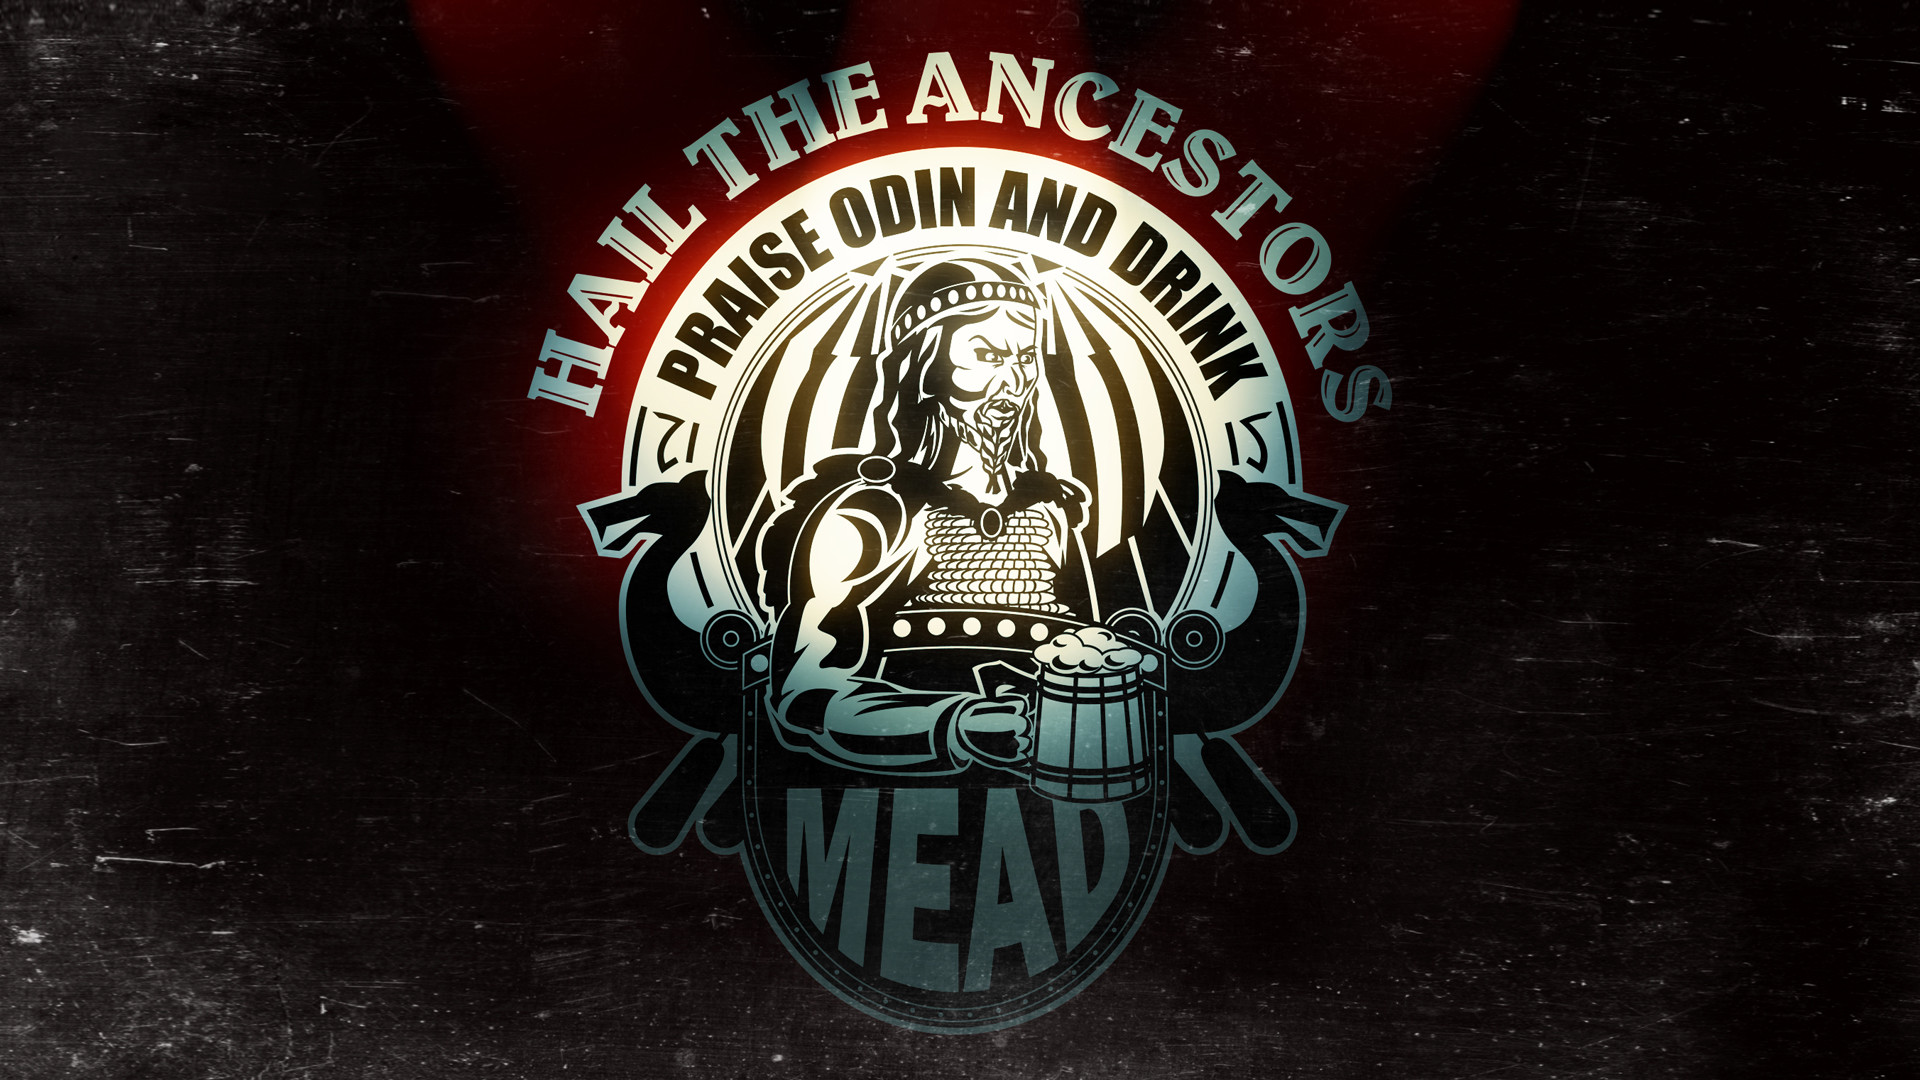 1920x1080 Prise Odin And Drink Mead